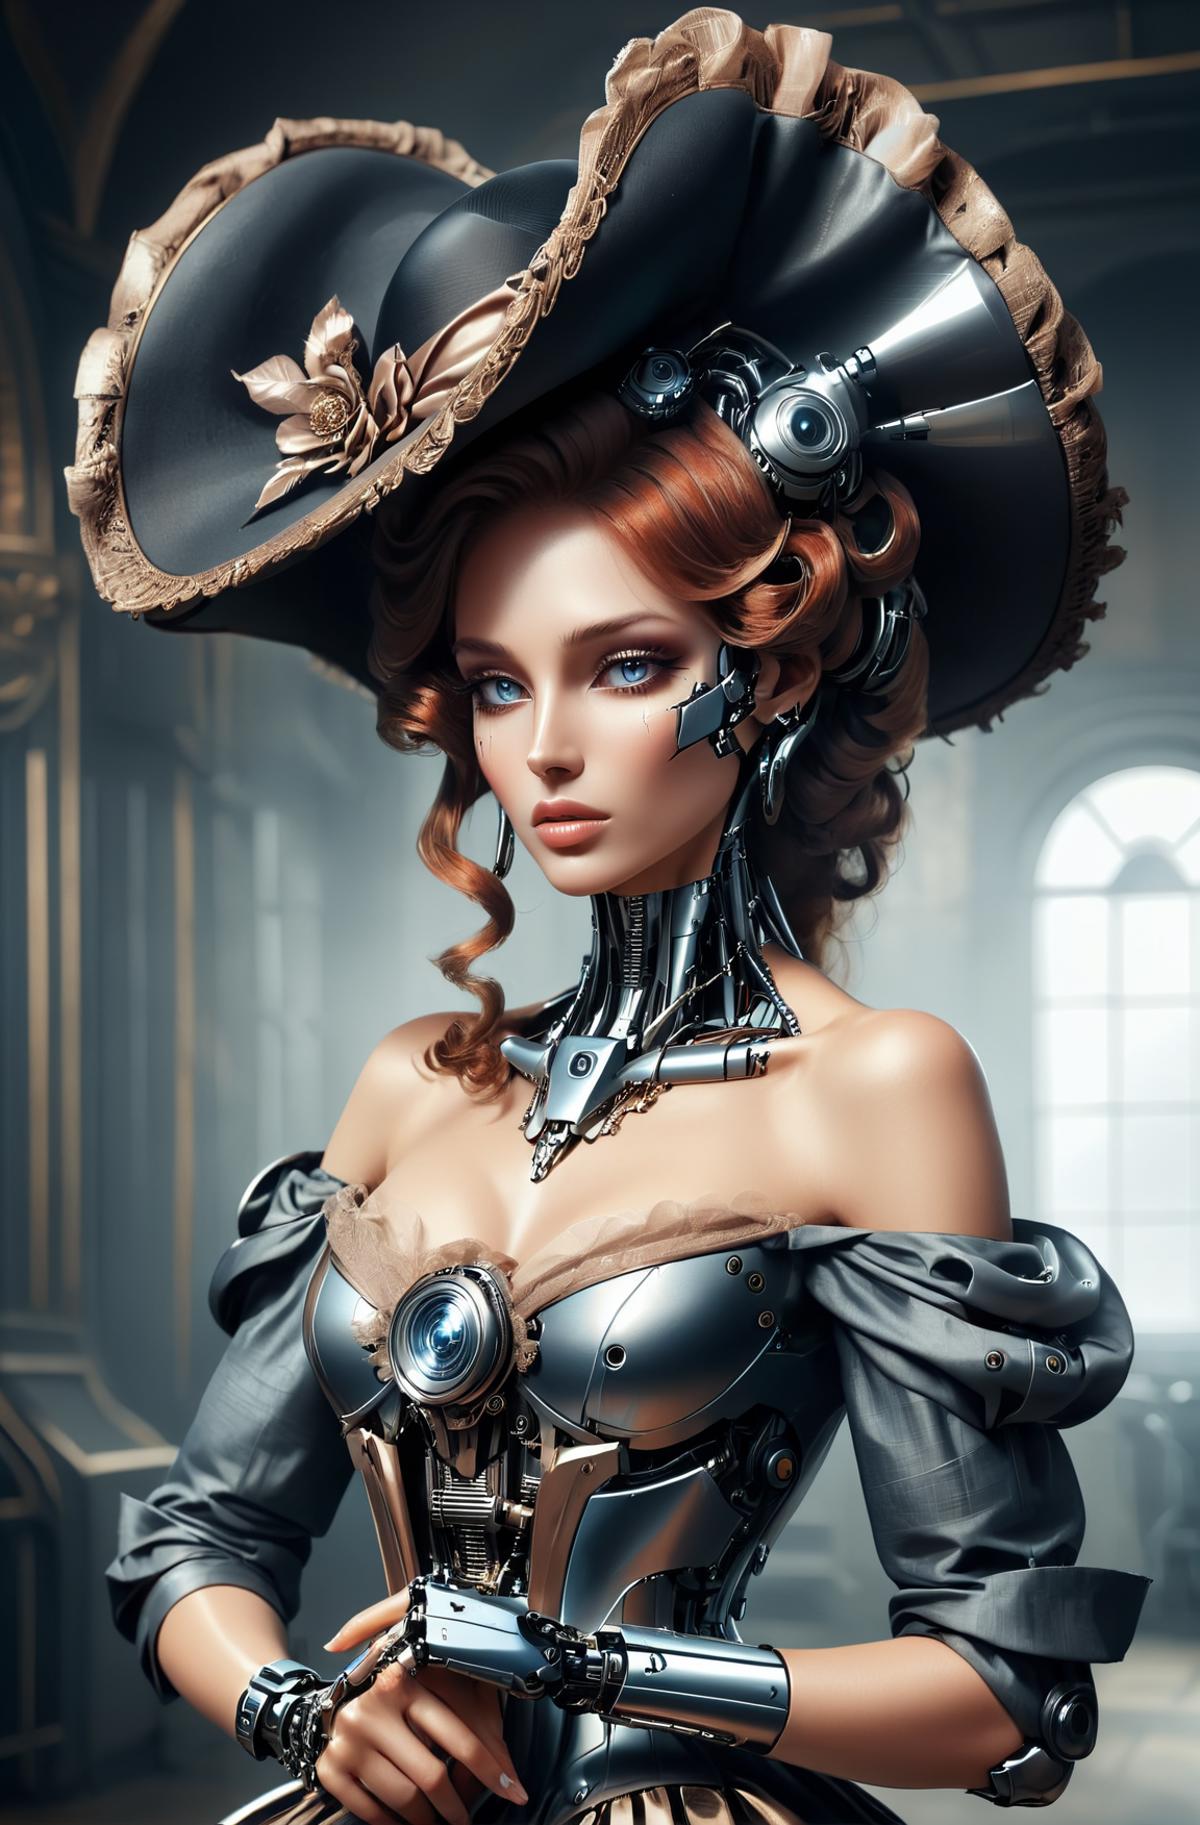 A 3D animated woman with a hat, goggles, and metal parts on her body.